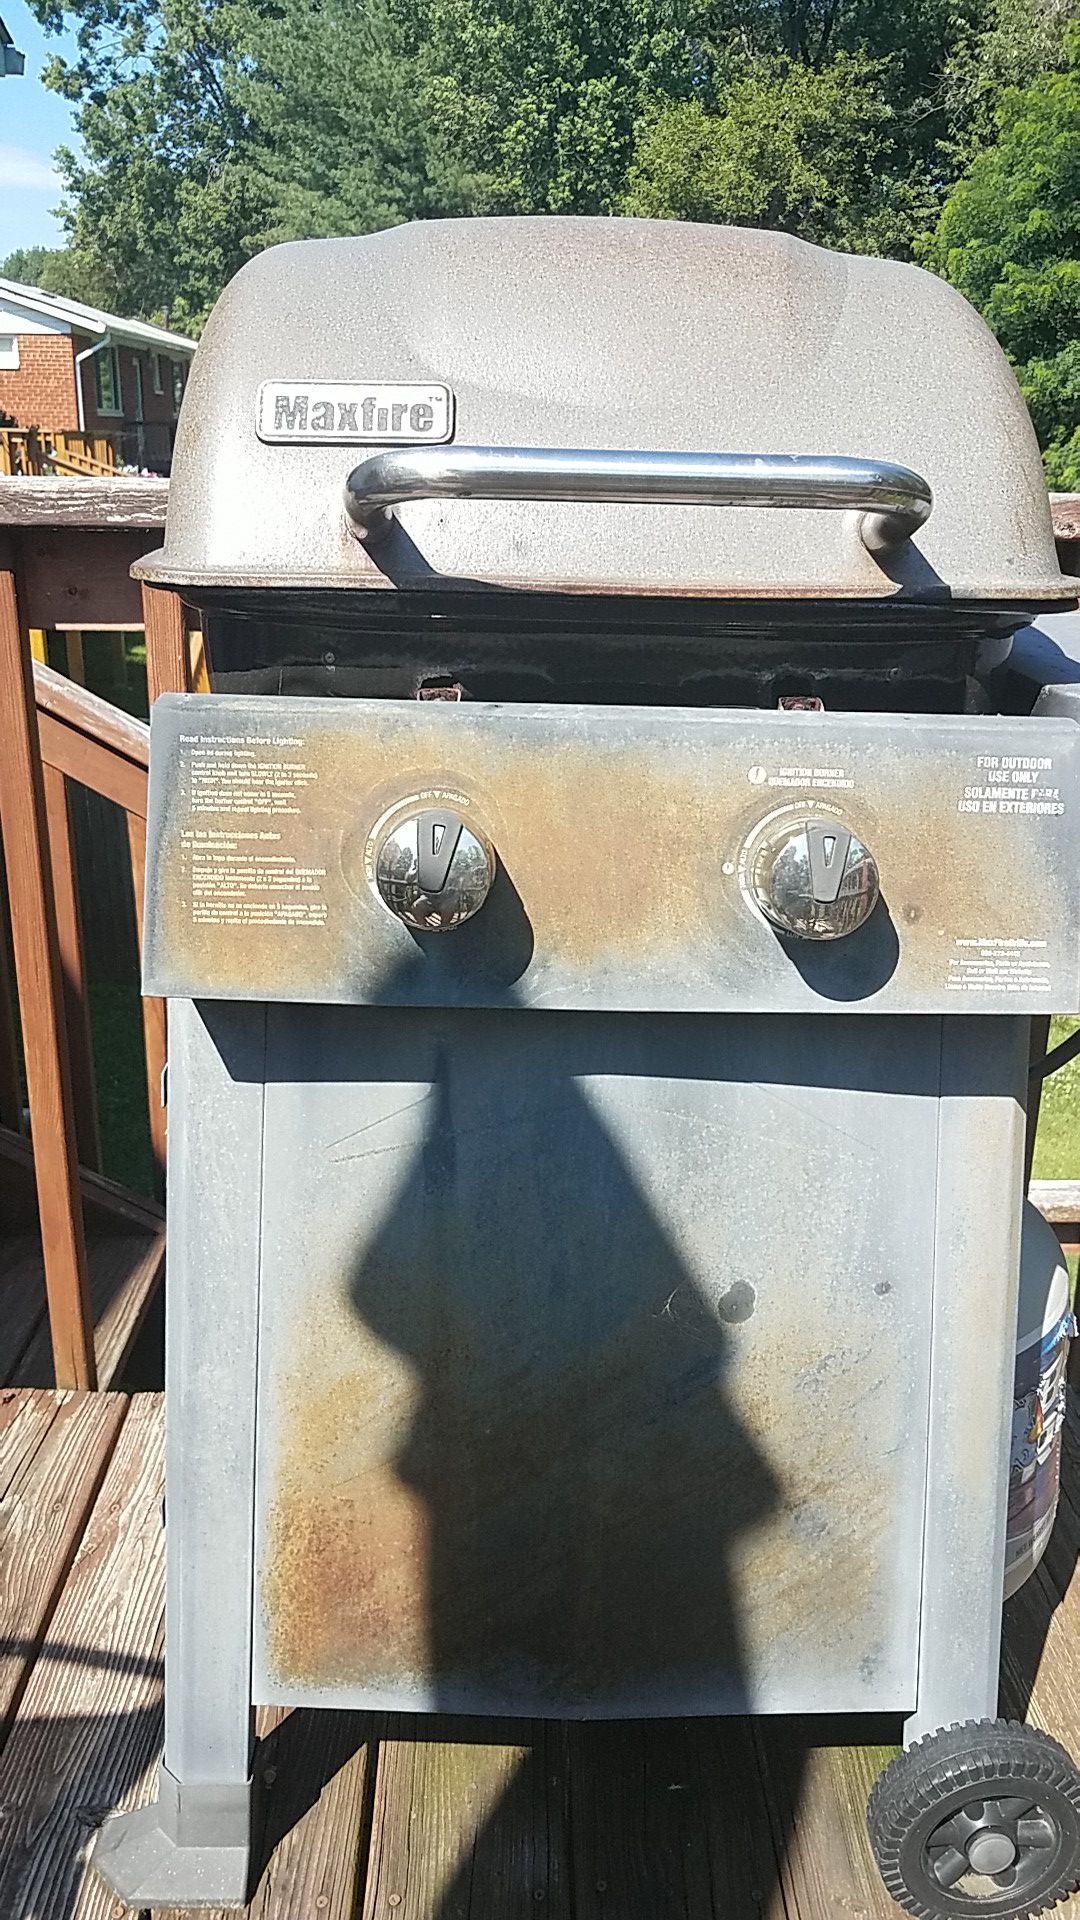 FREE - Max fire LPG Gas Grill